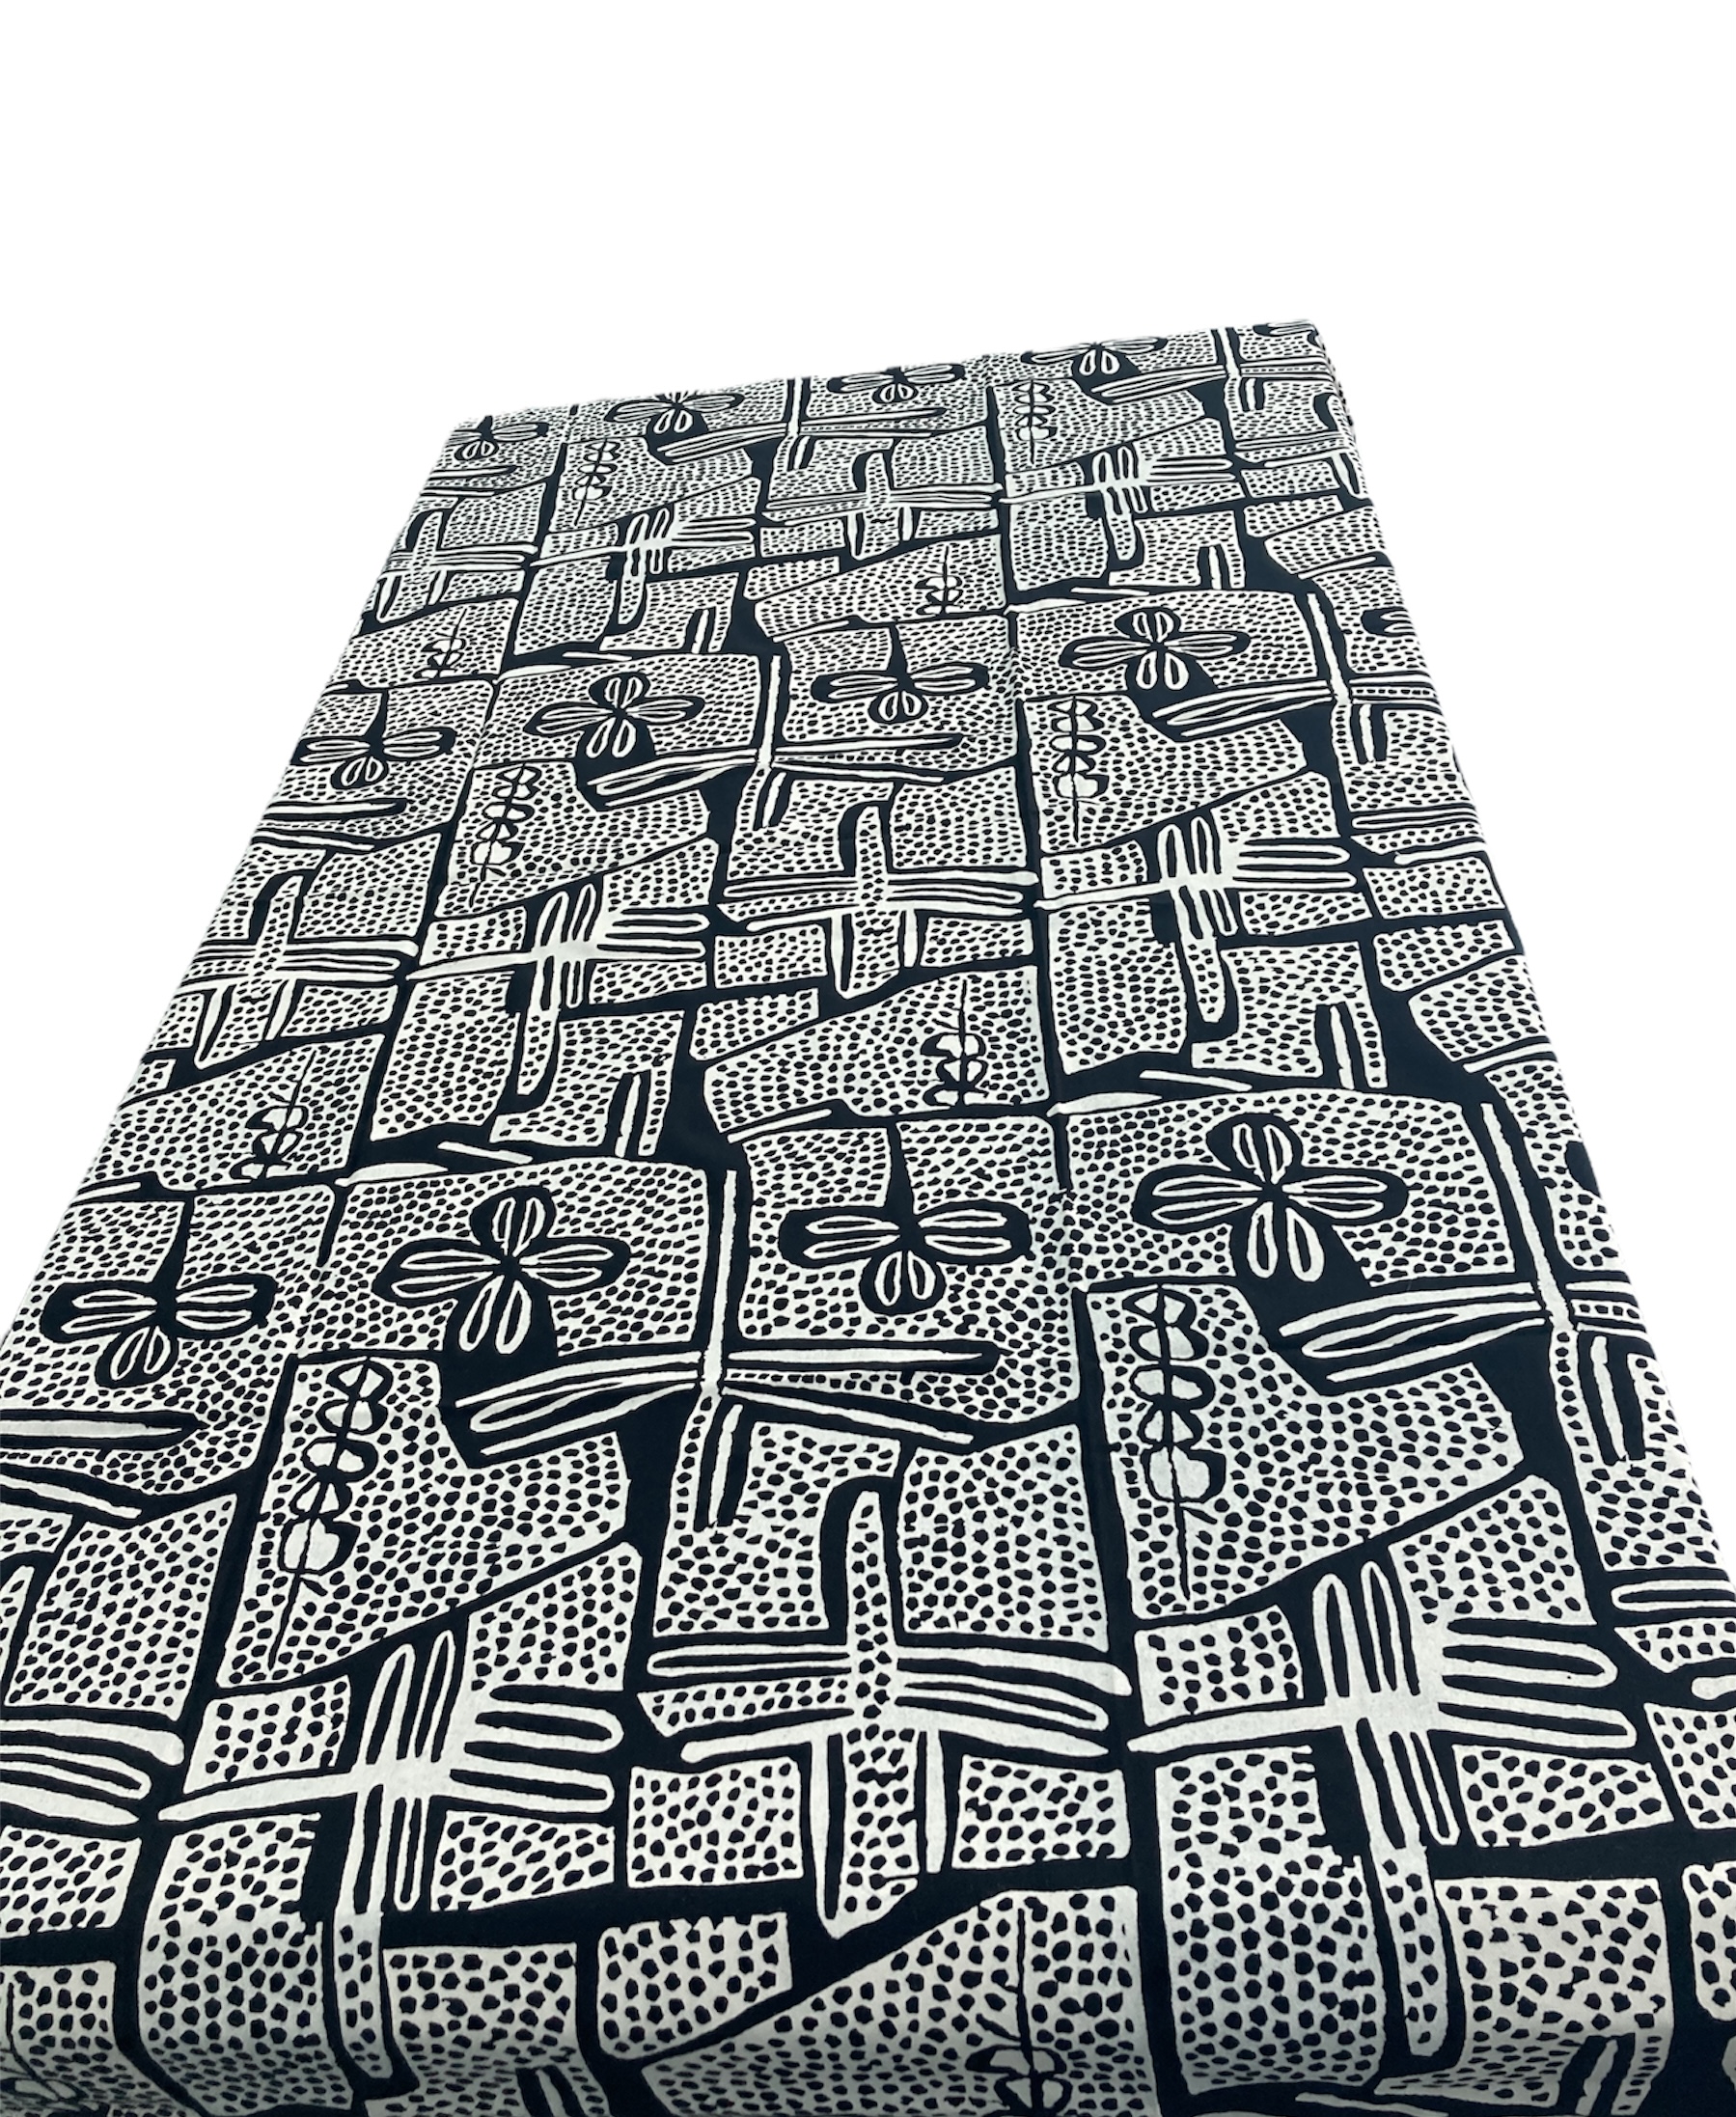 100% cotton Tablecloth approx. 87\" x 57\" from Namibia - # baw09t